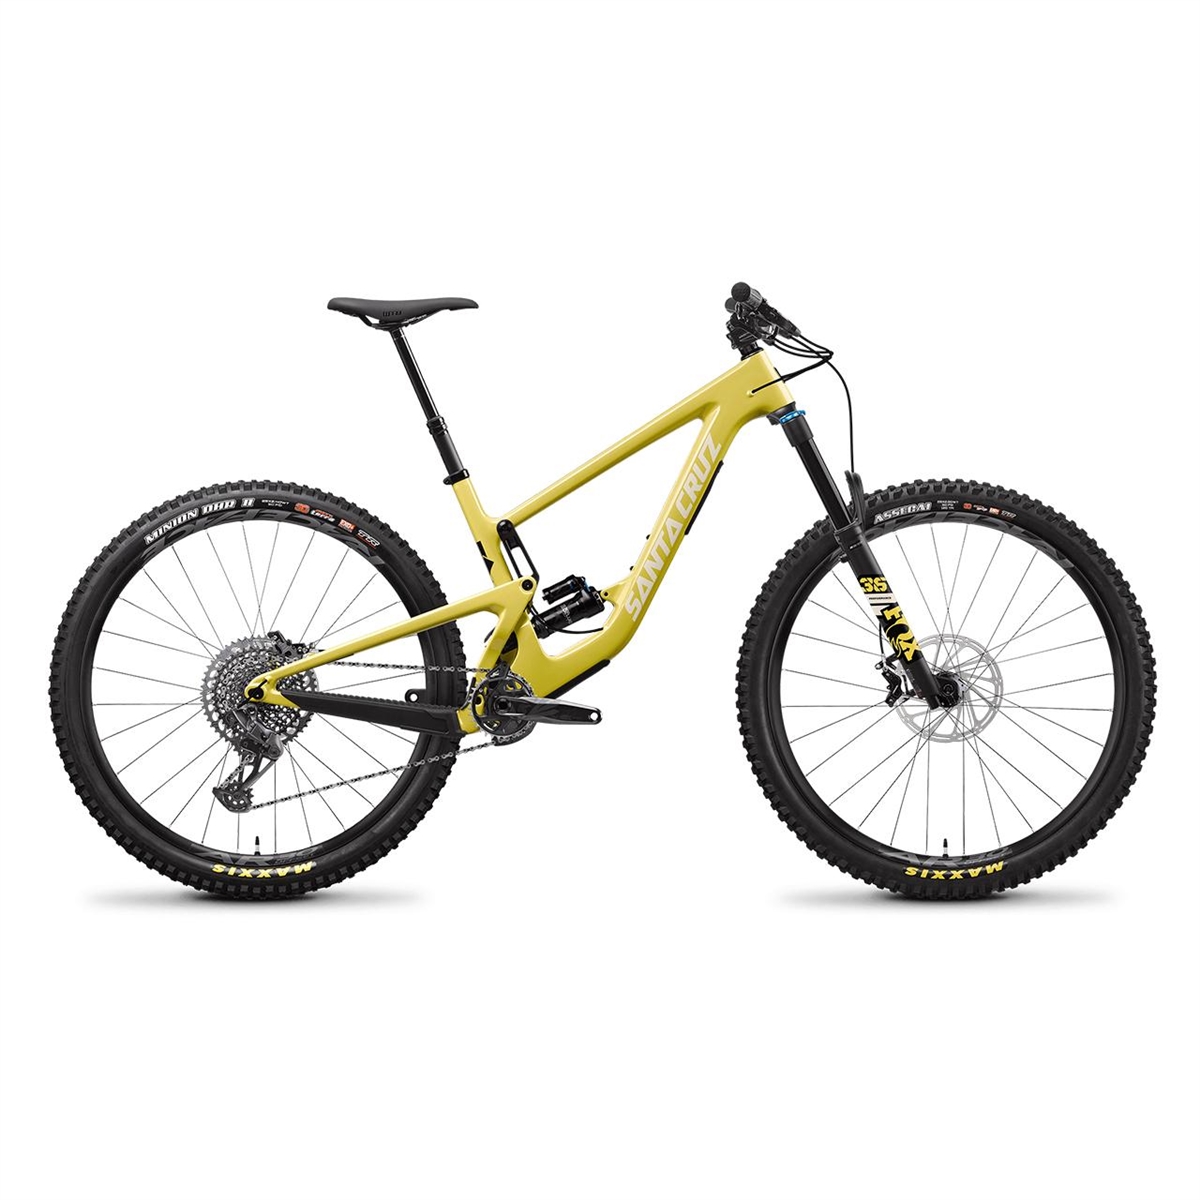 MEGATOWER 1 C S 29'' 160mm 12s Yellow size S